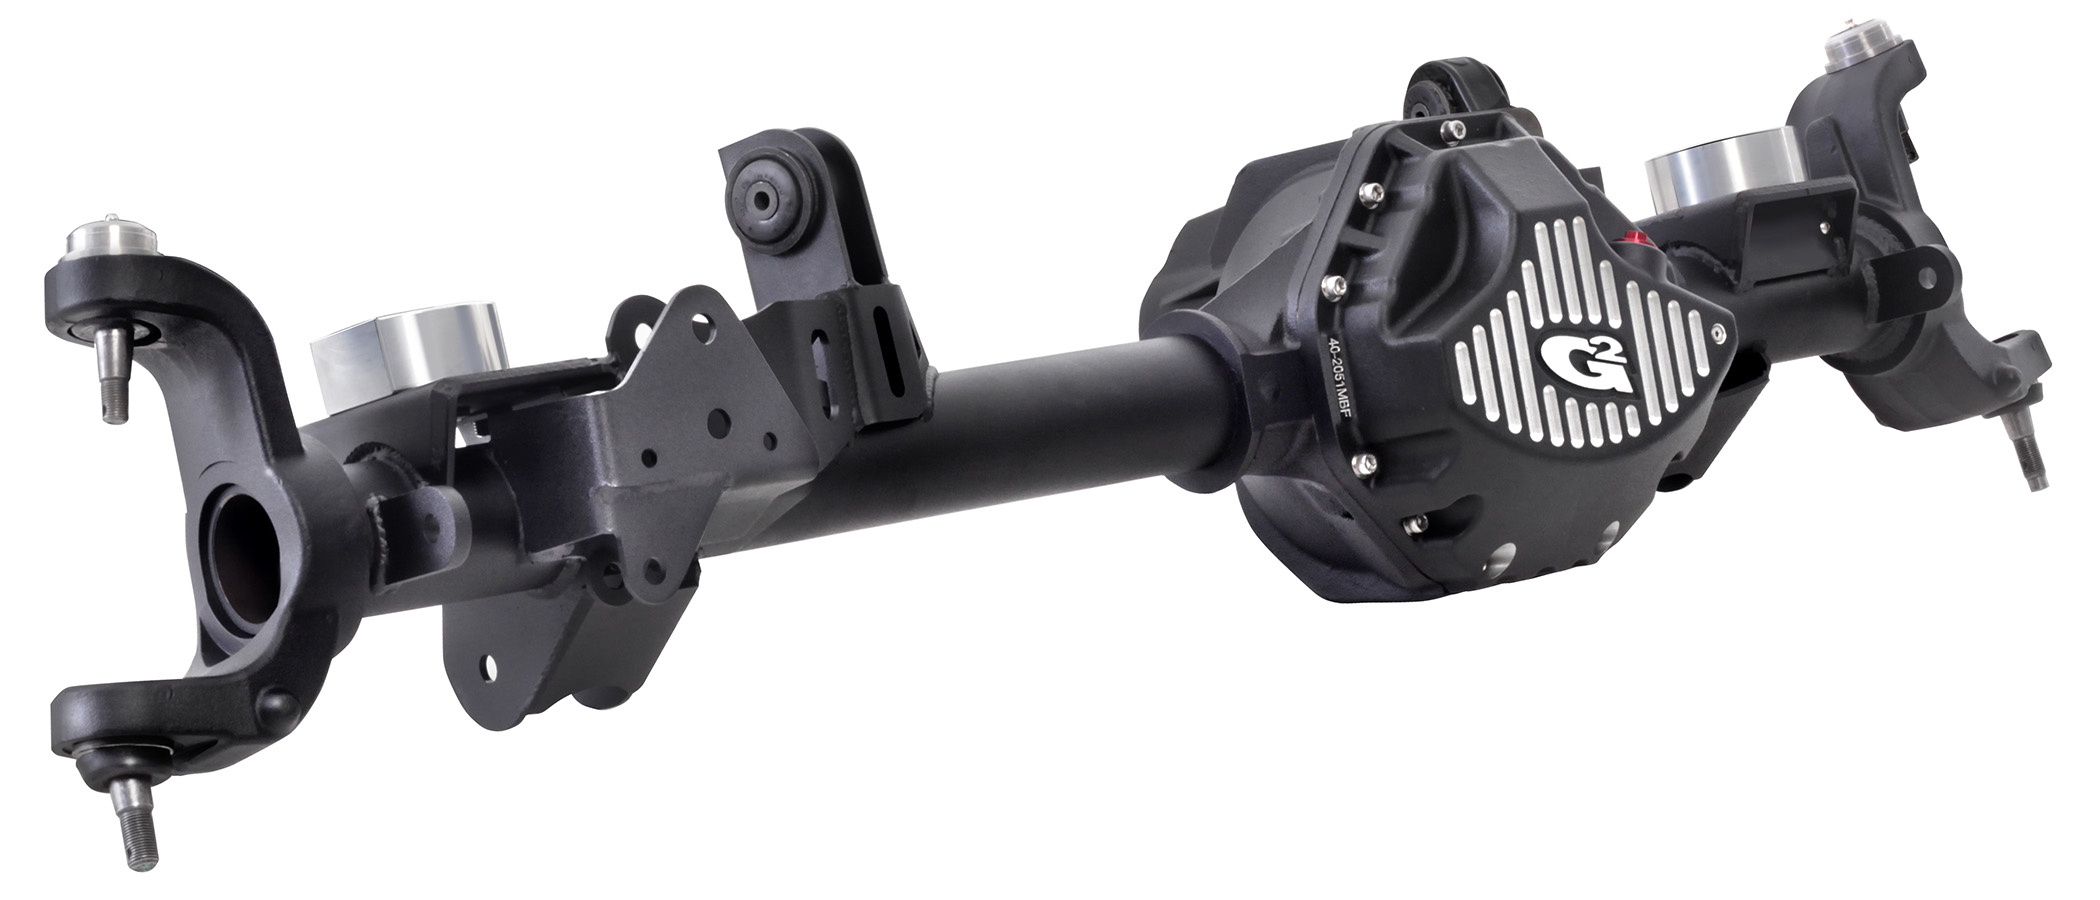 New At Summit Racing G2 Axle And Gear Core Dana 44 Axle Housings And